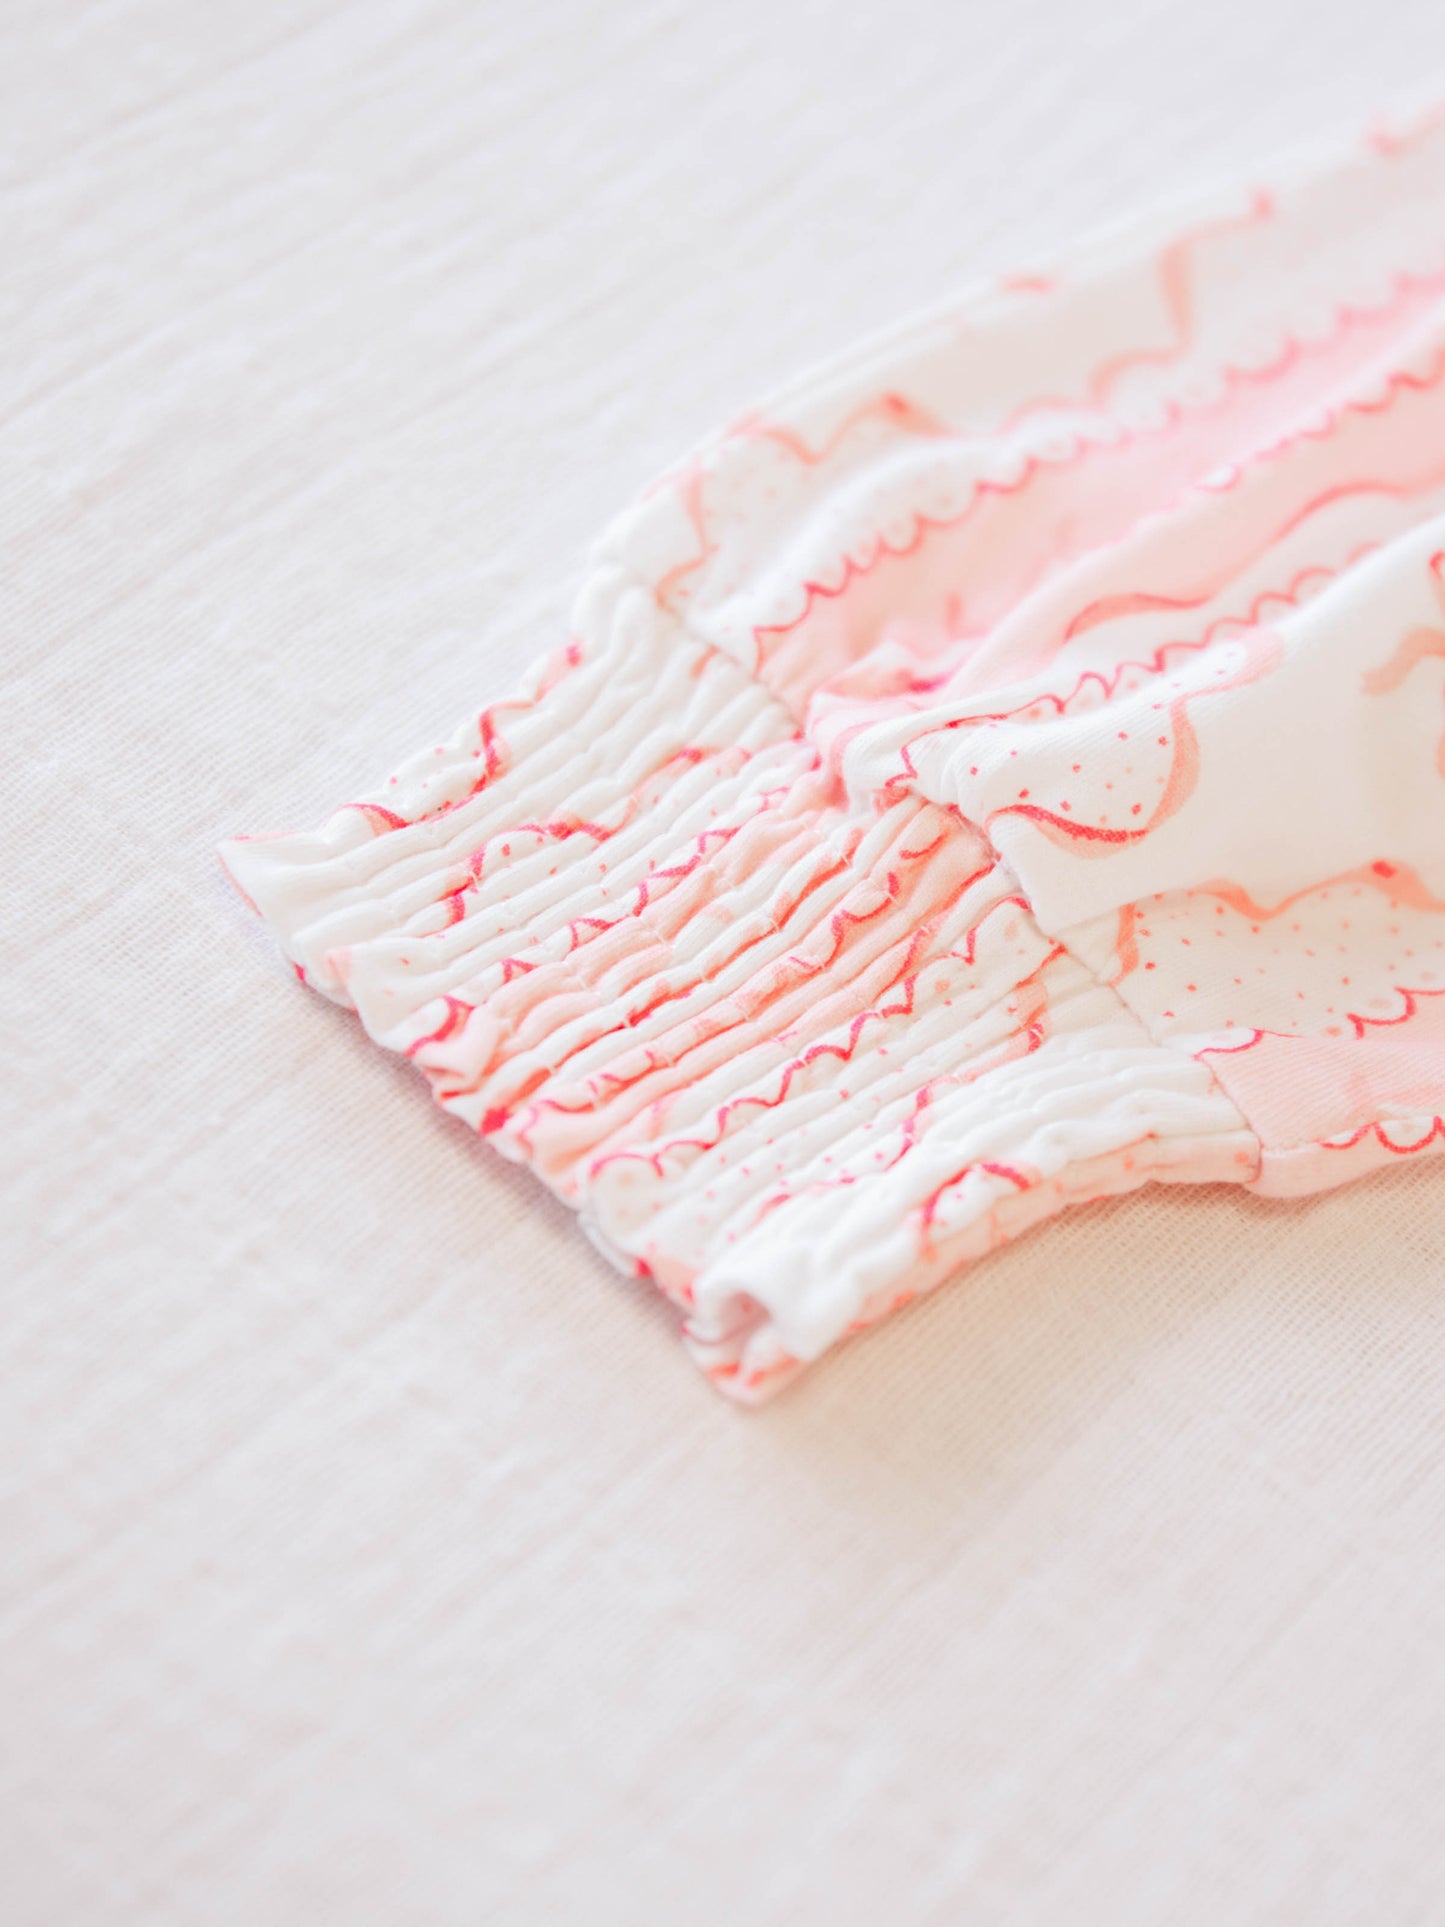 Smocked Romper - Pink Lace